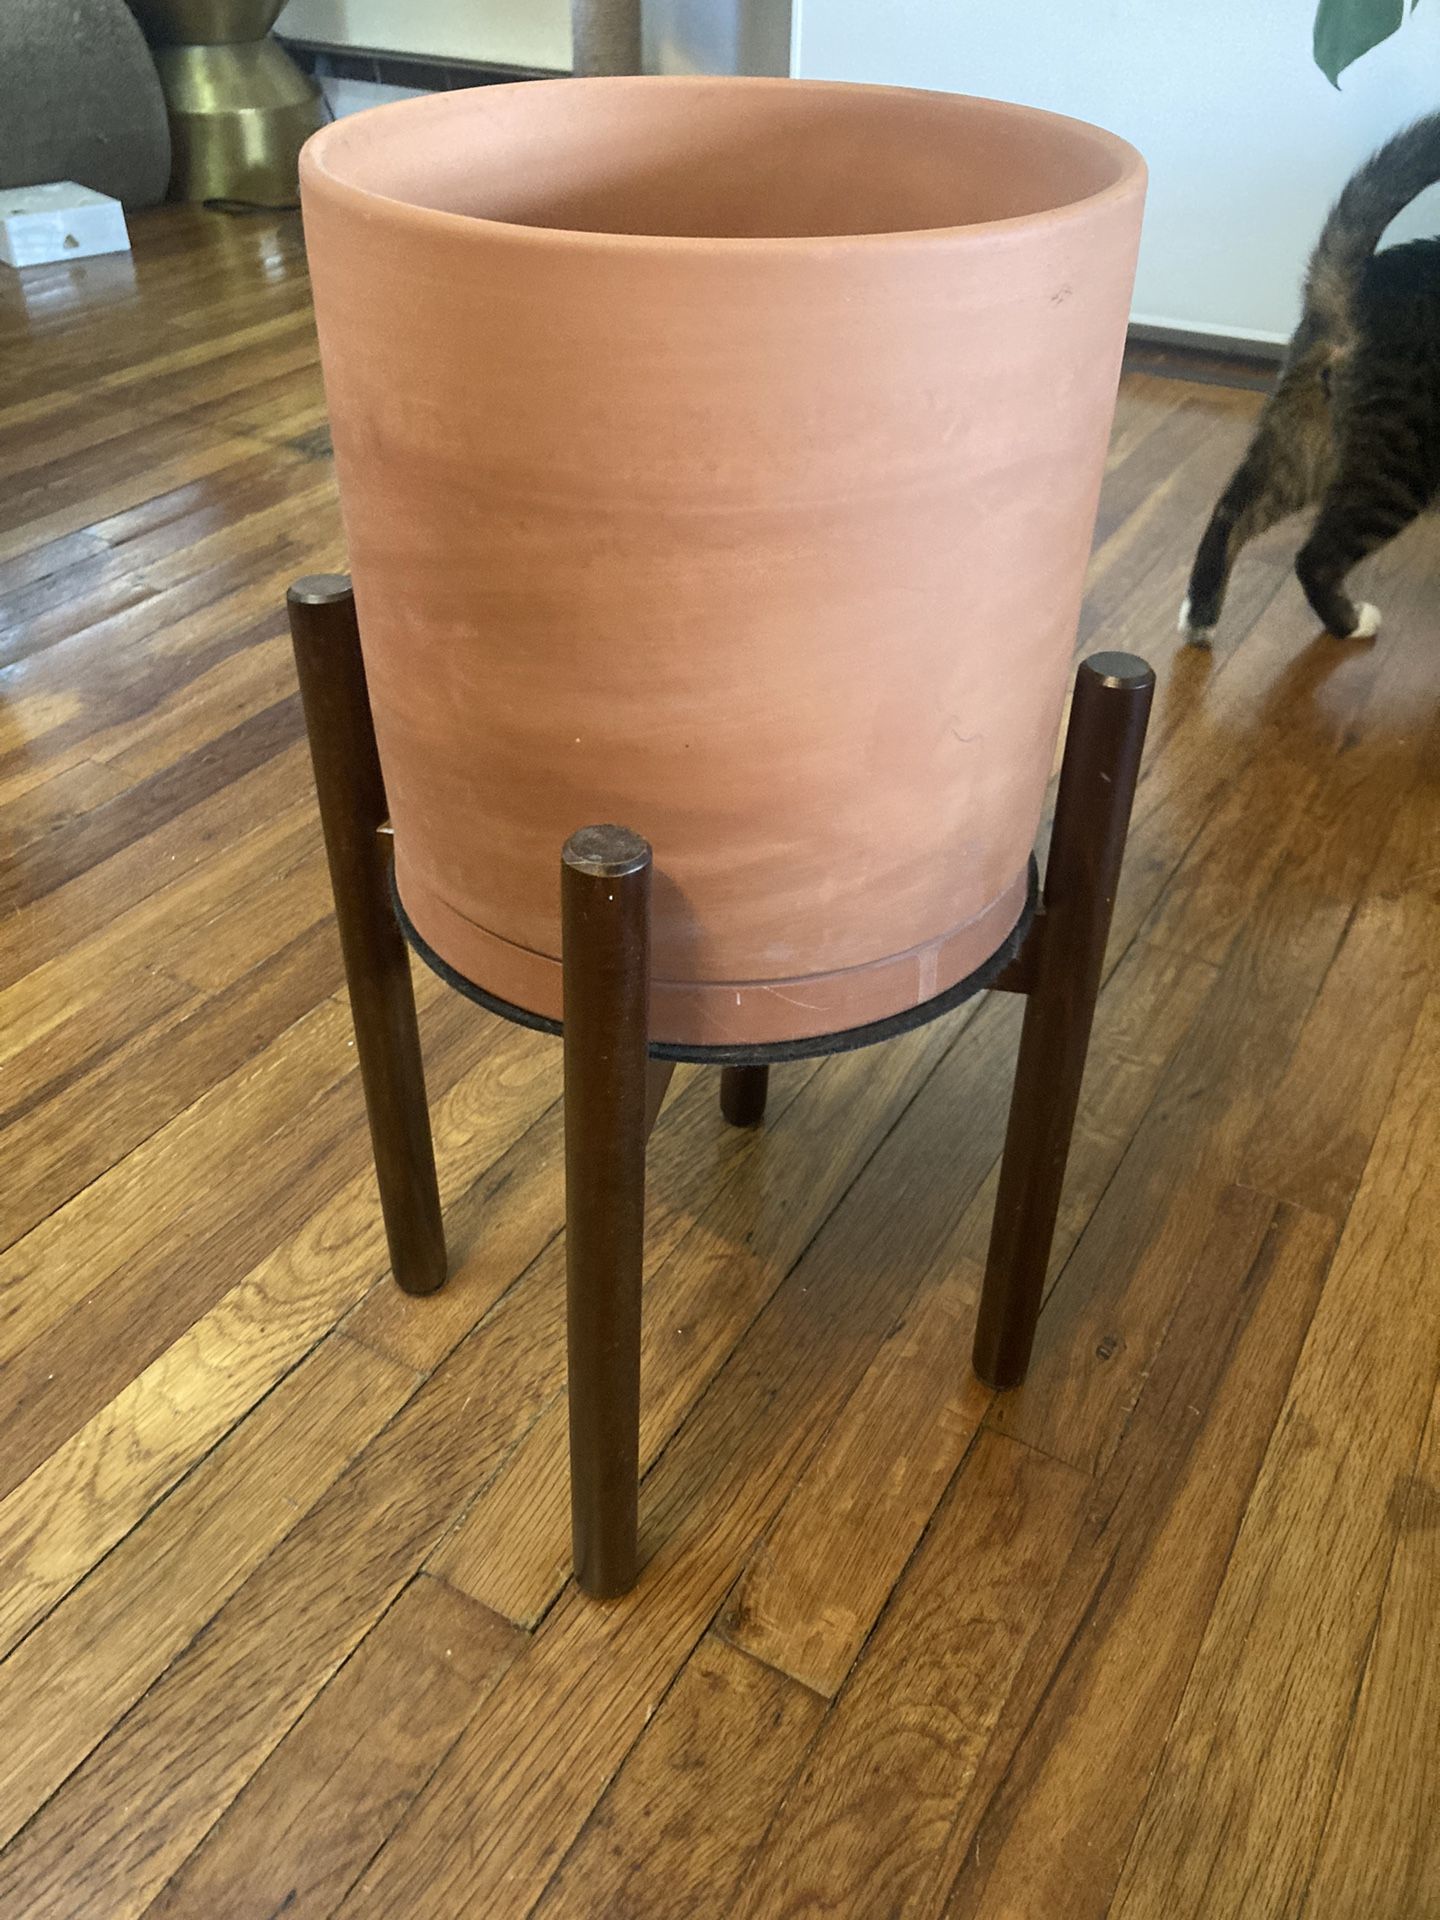 Terra Cotta Pot And Stand